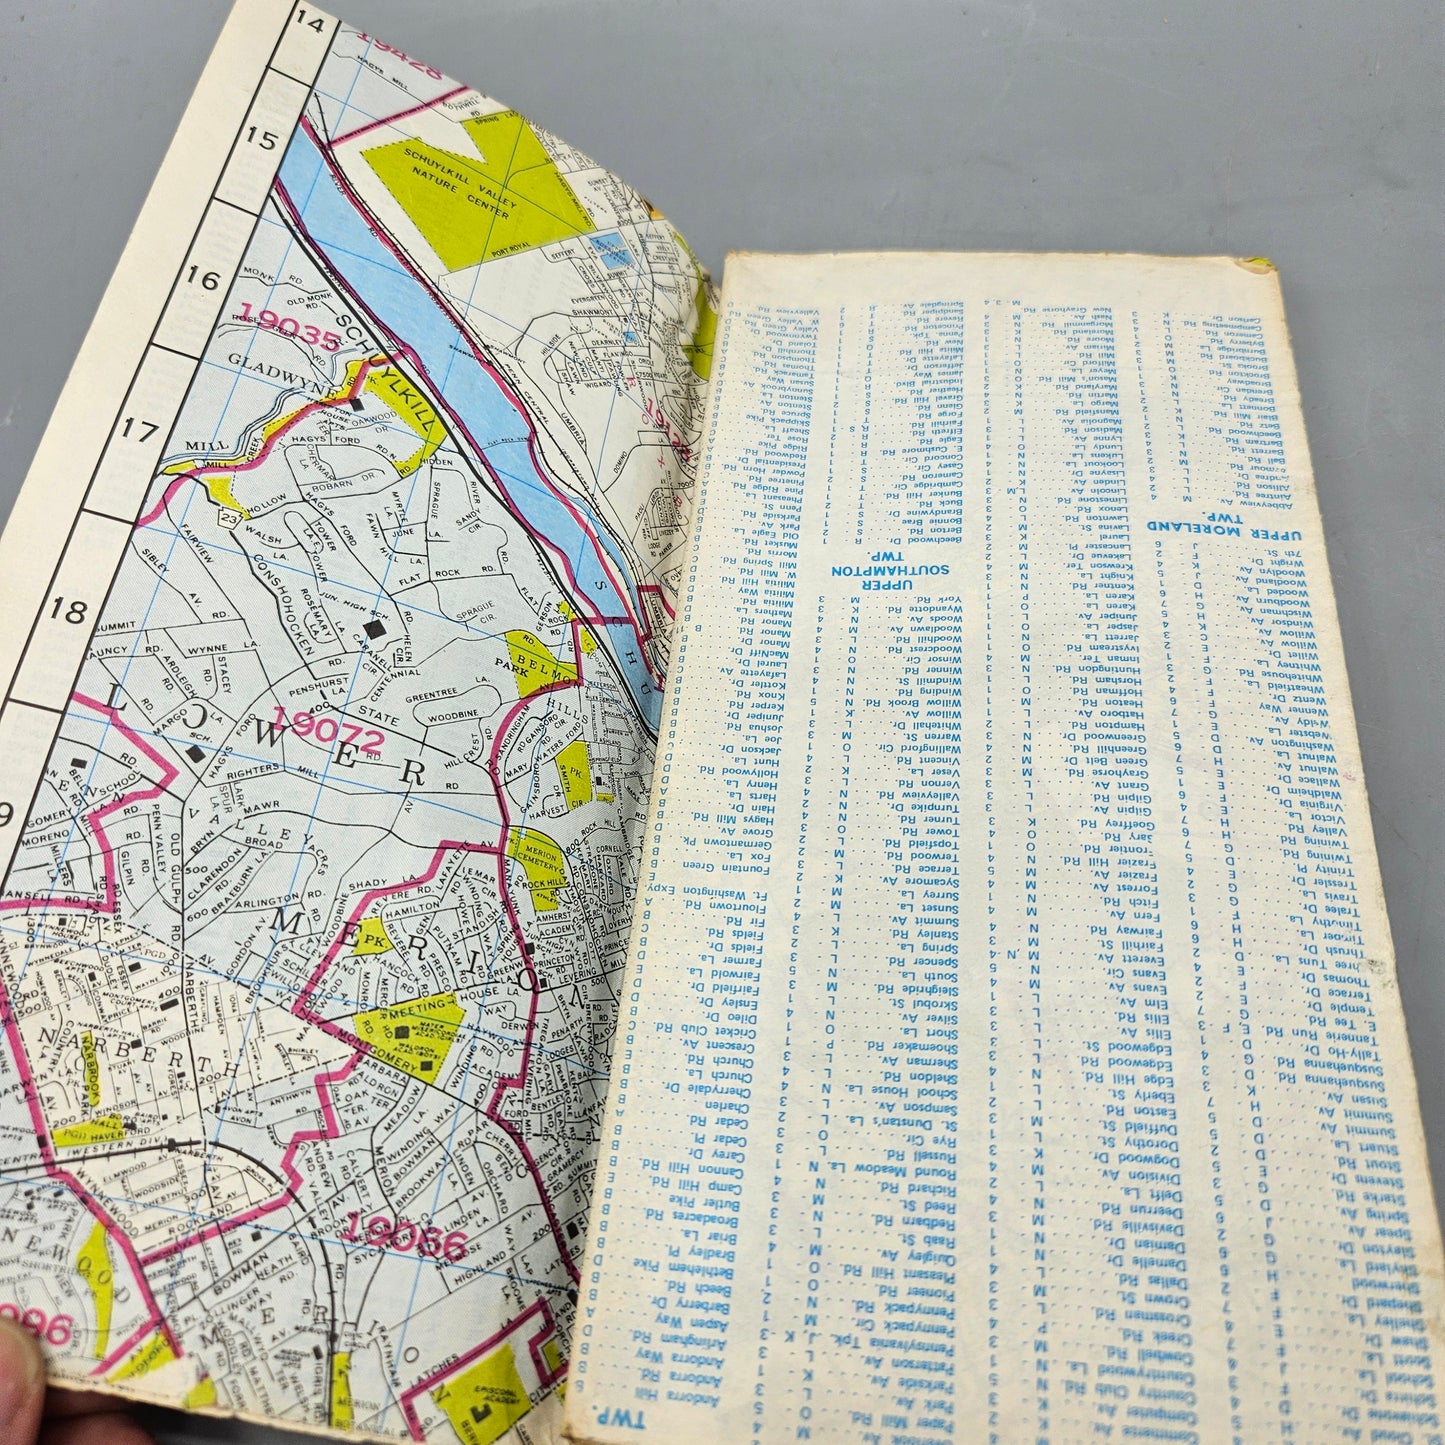 Vintage Street Map of Chester County, PA by Franklin Maps